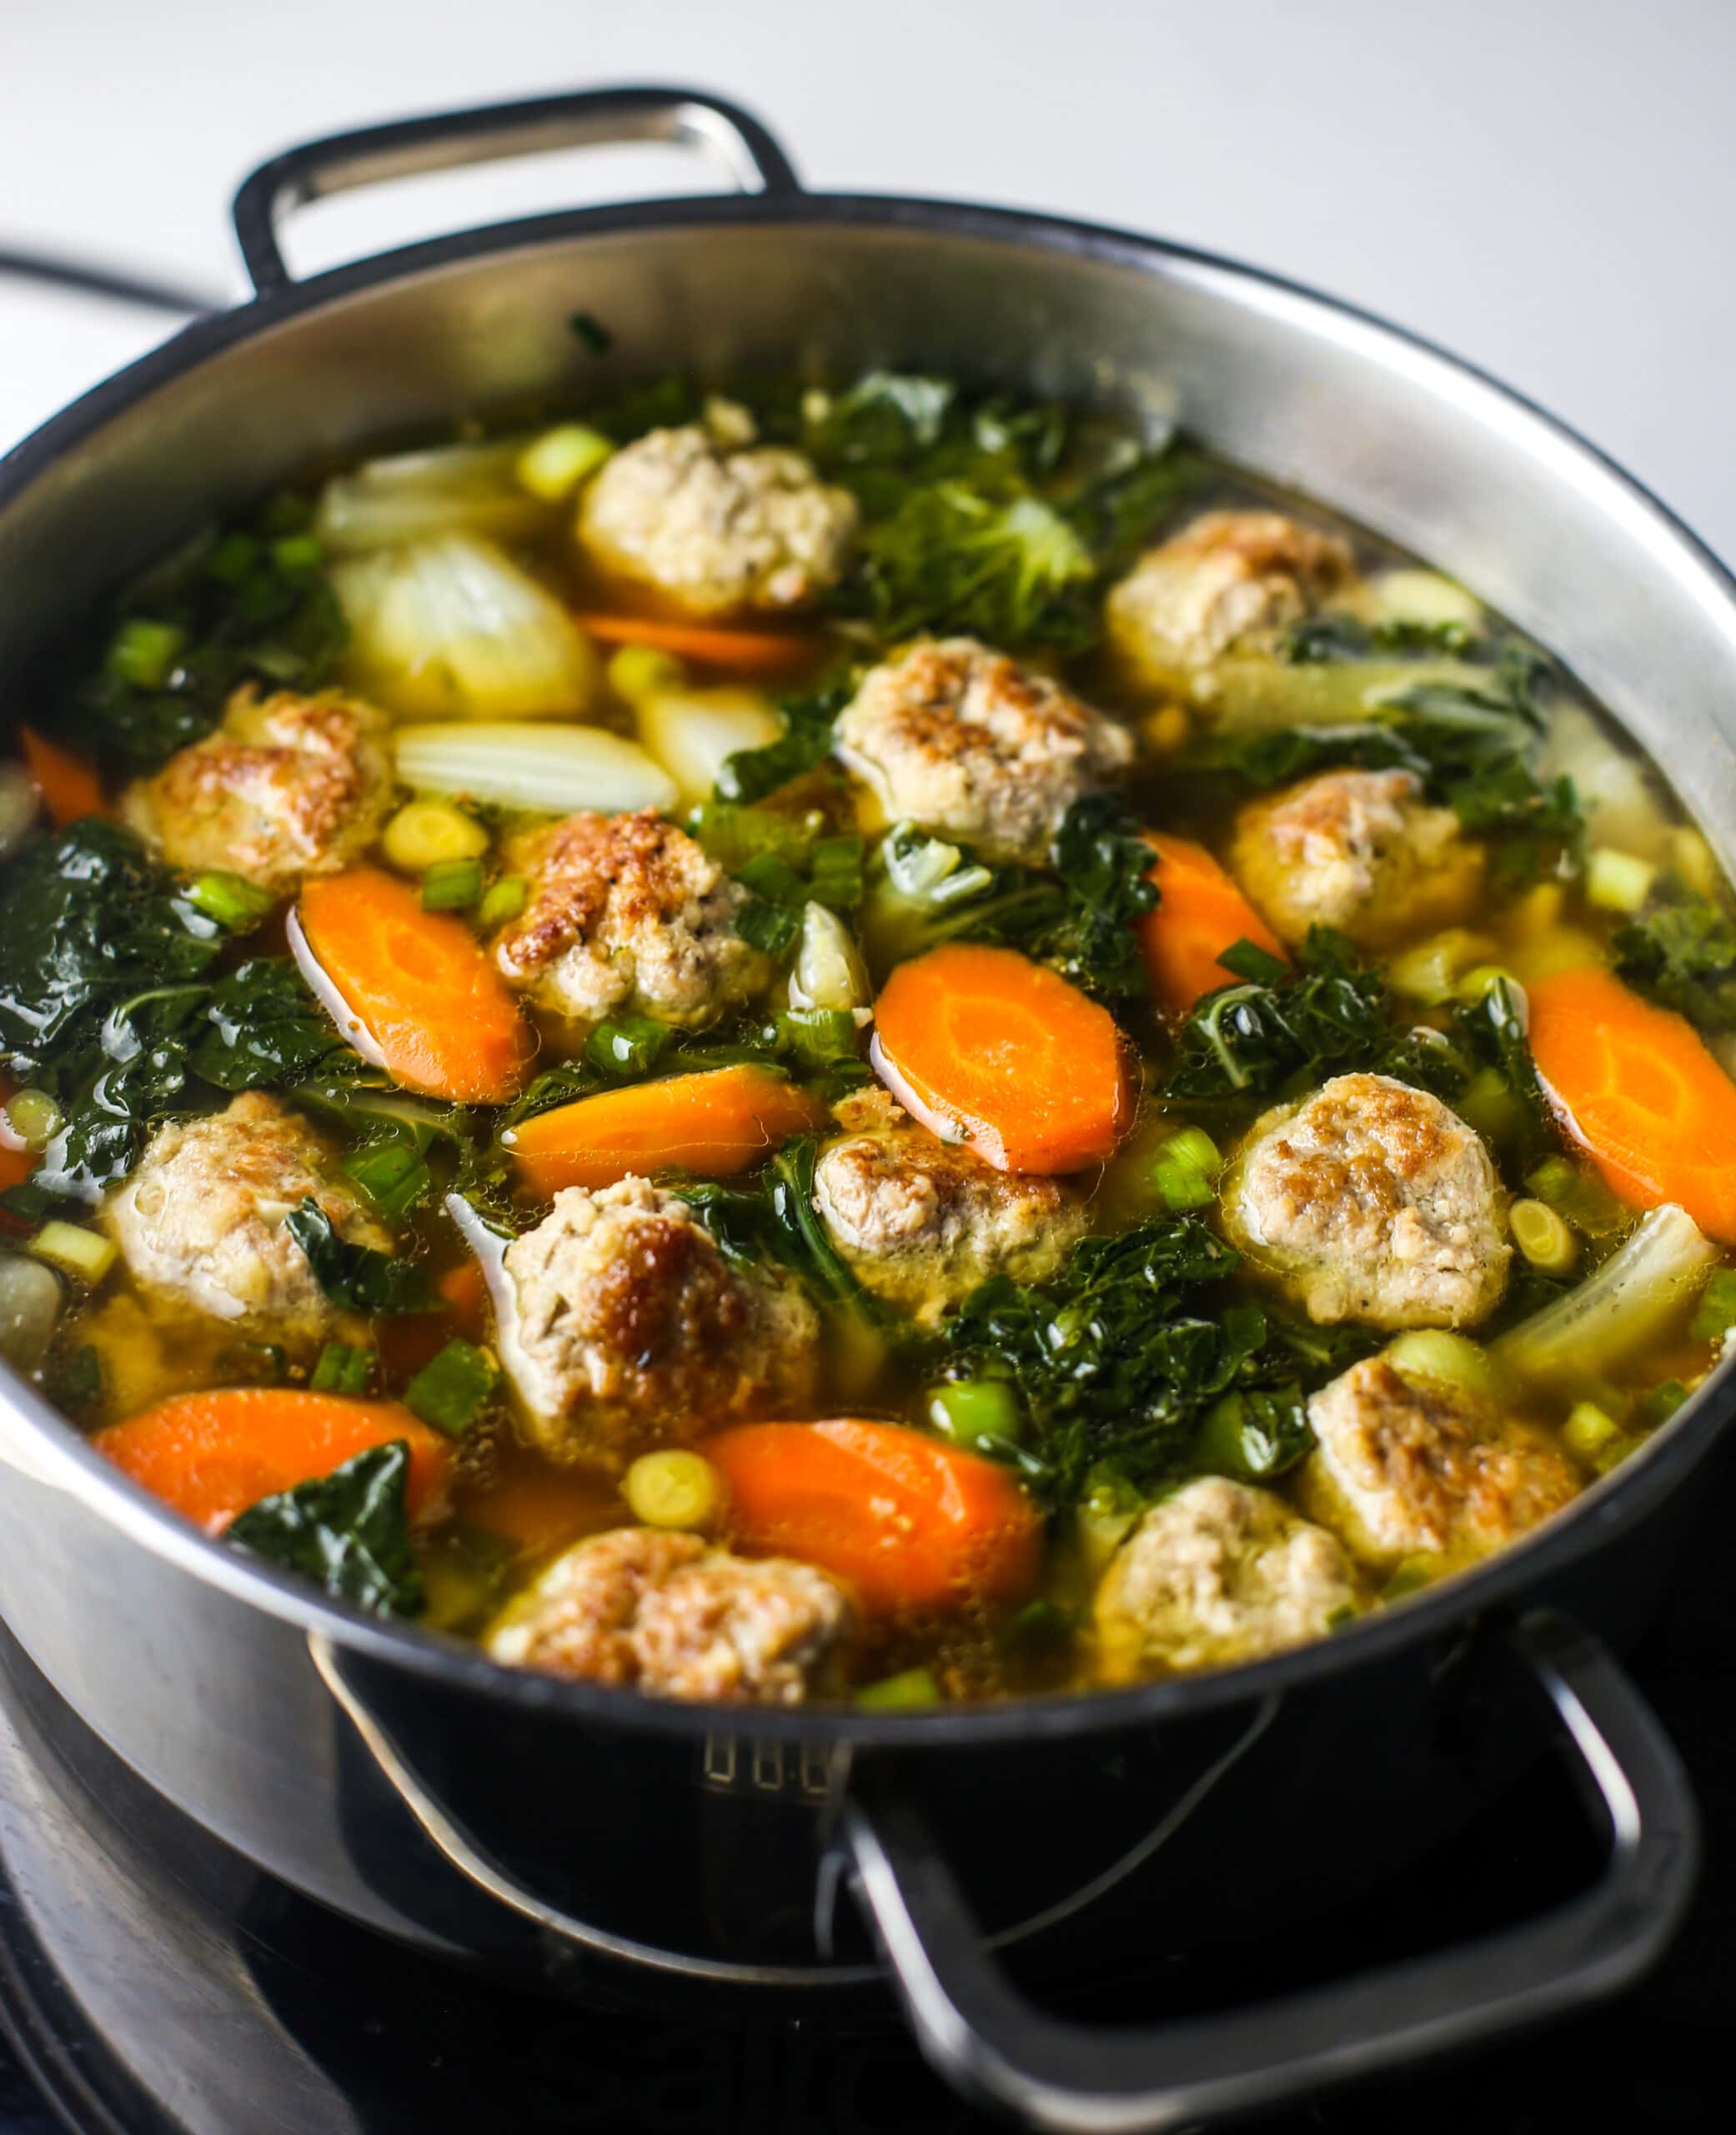 A side angled view of ginger pork meatball with bok choy in a large stainless steel pot.